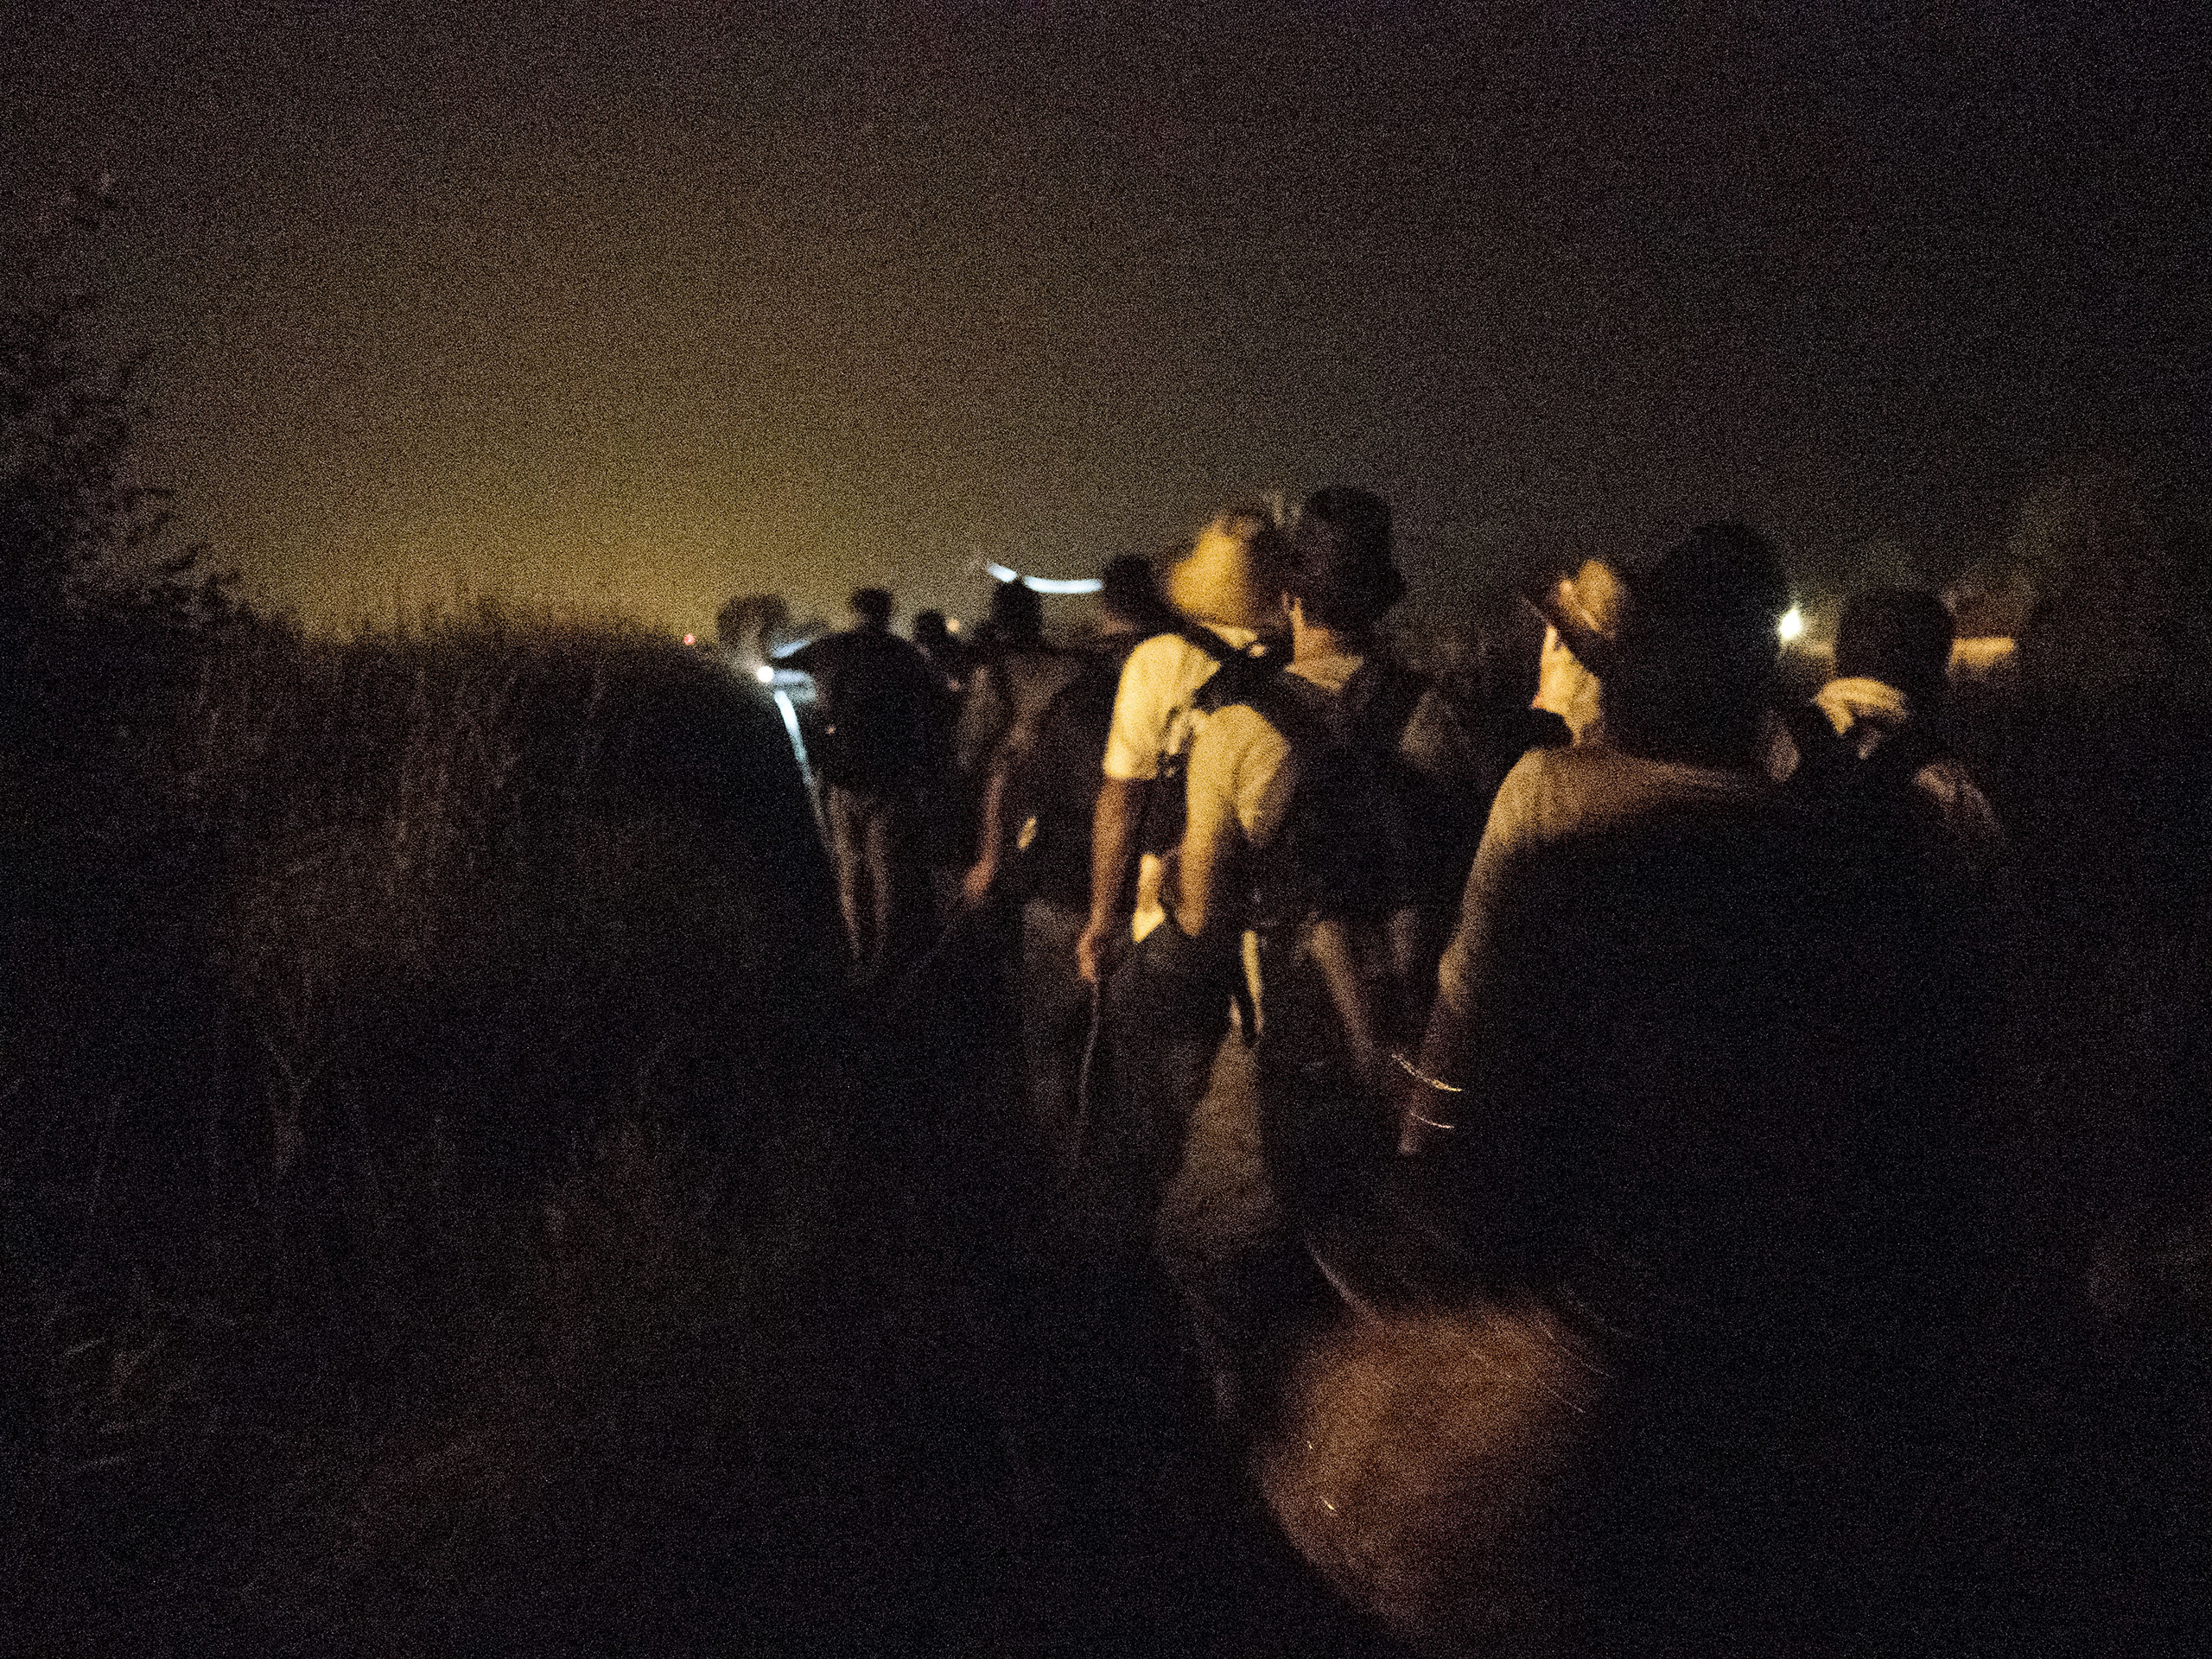 Horgos, Serbia. August 12, 2015. Syrian families wait for nightfall to walk toward the border to attempt to cross it.